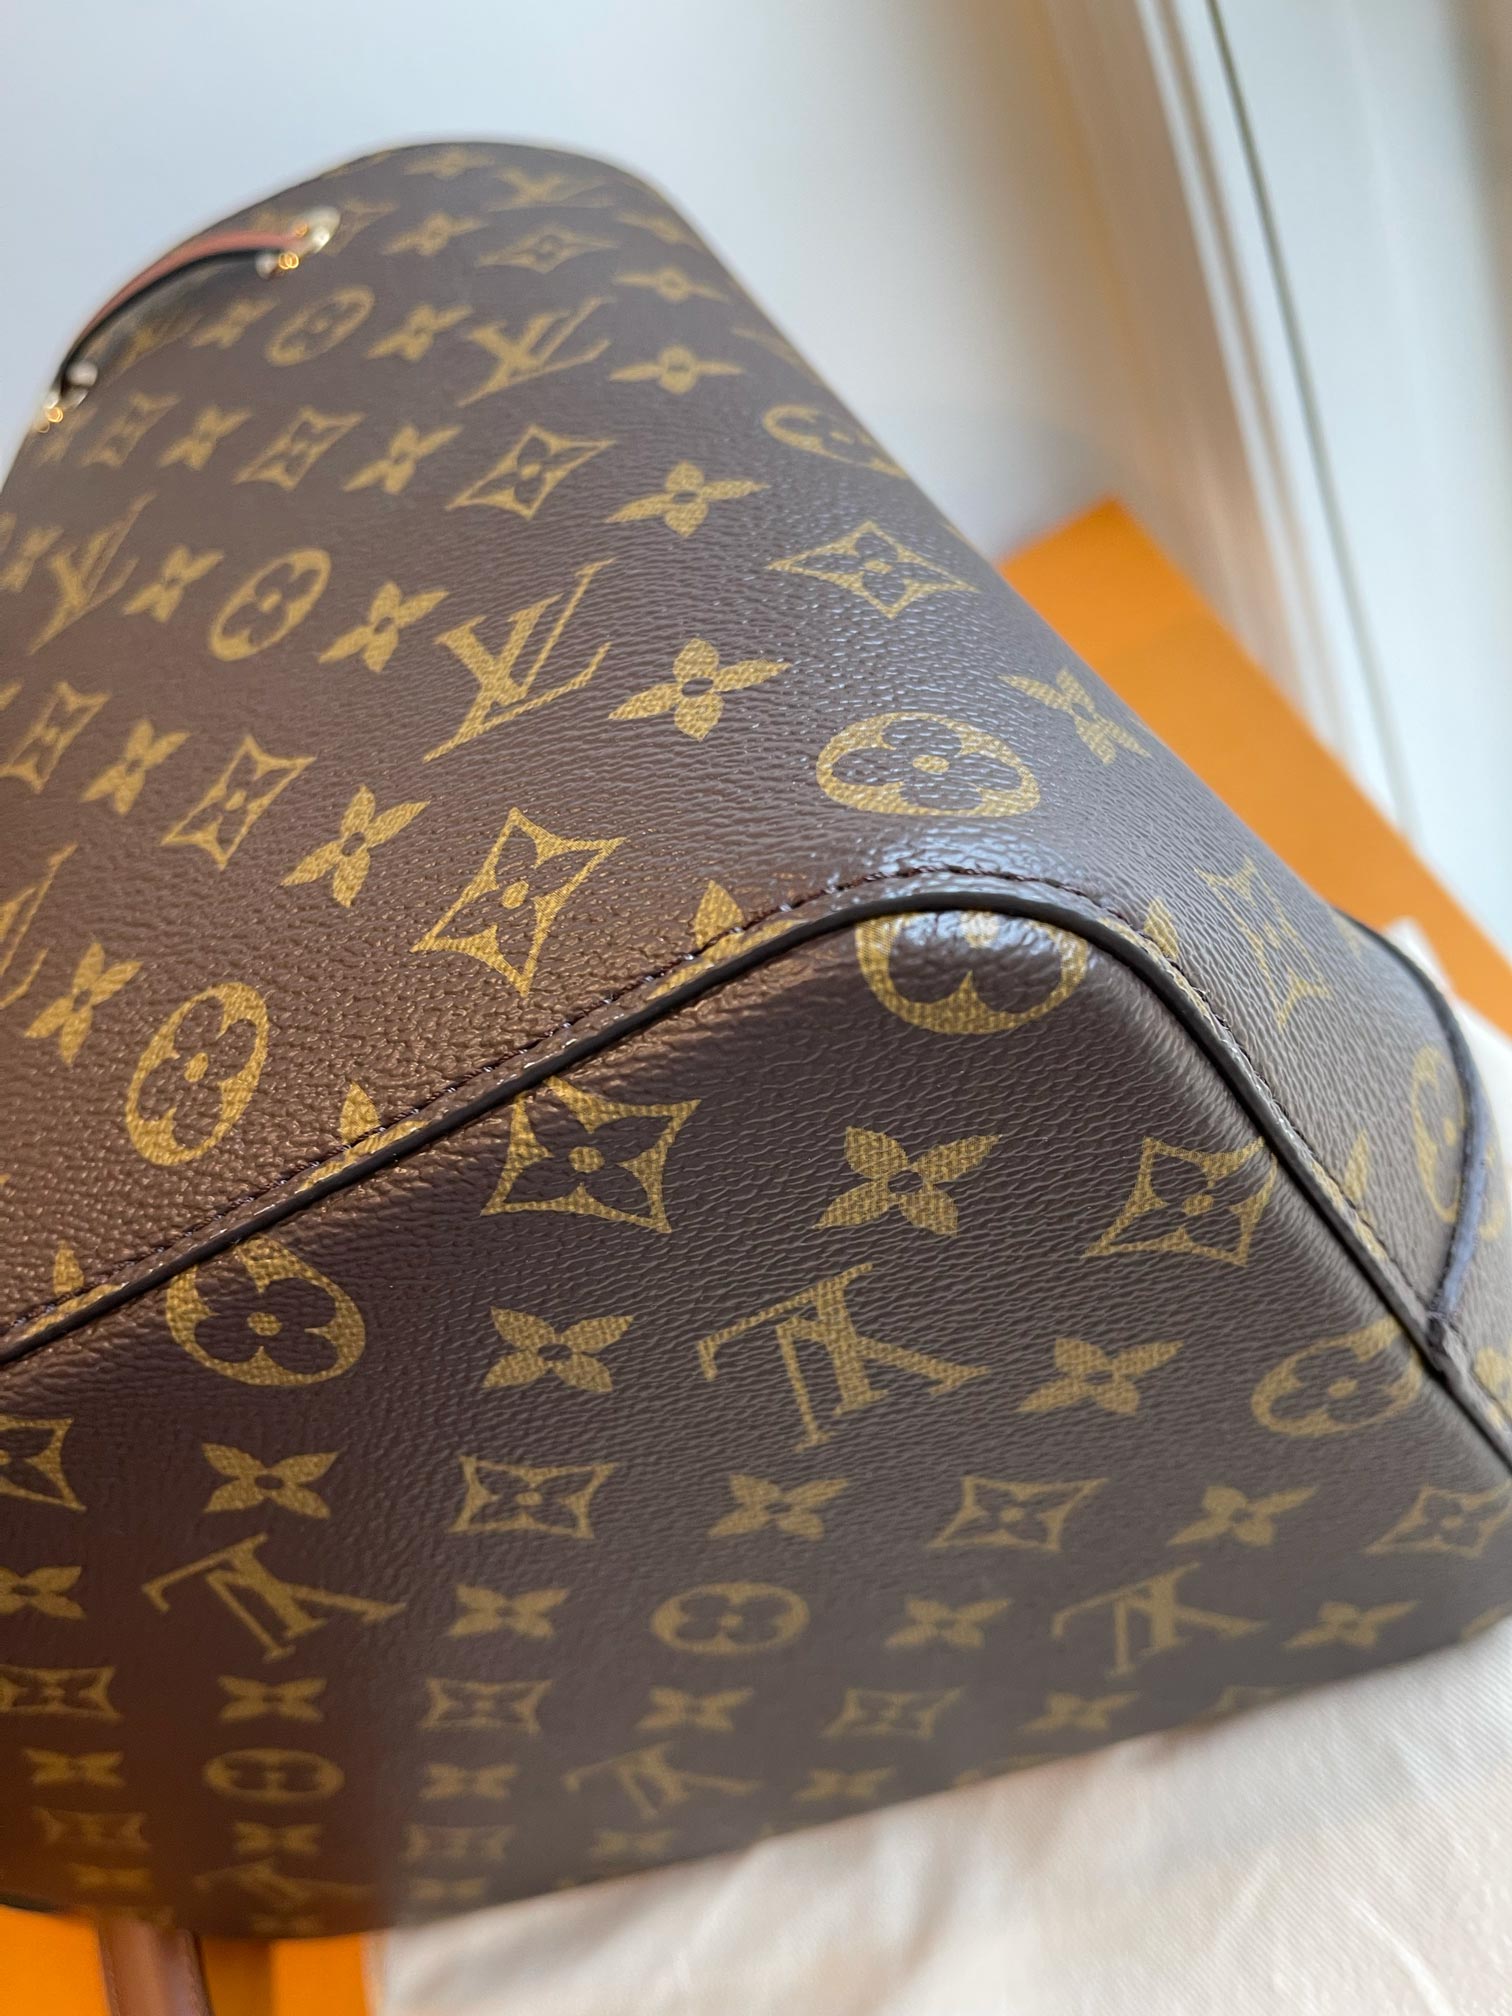 Louis Vuitton NeoNoe - Caramel with Inserts and Handle